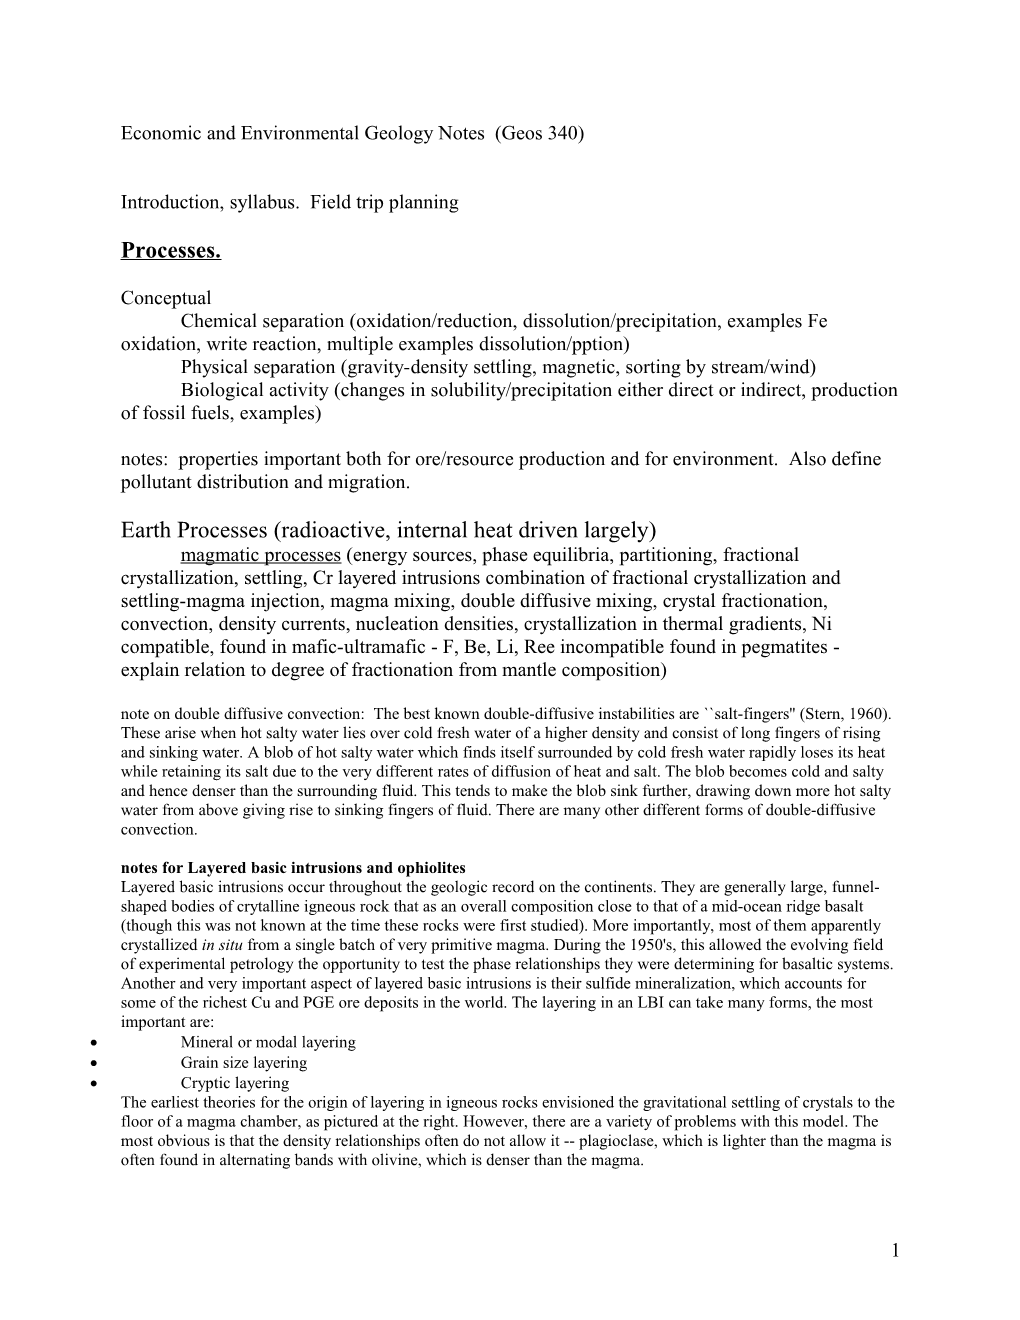 Economic and Environmental Geology Notes (Geos 340)